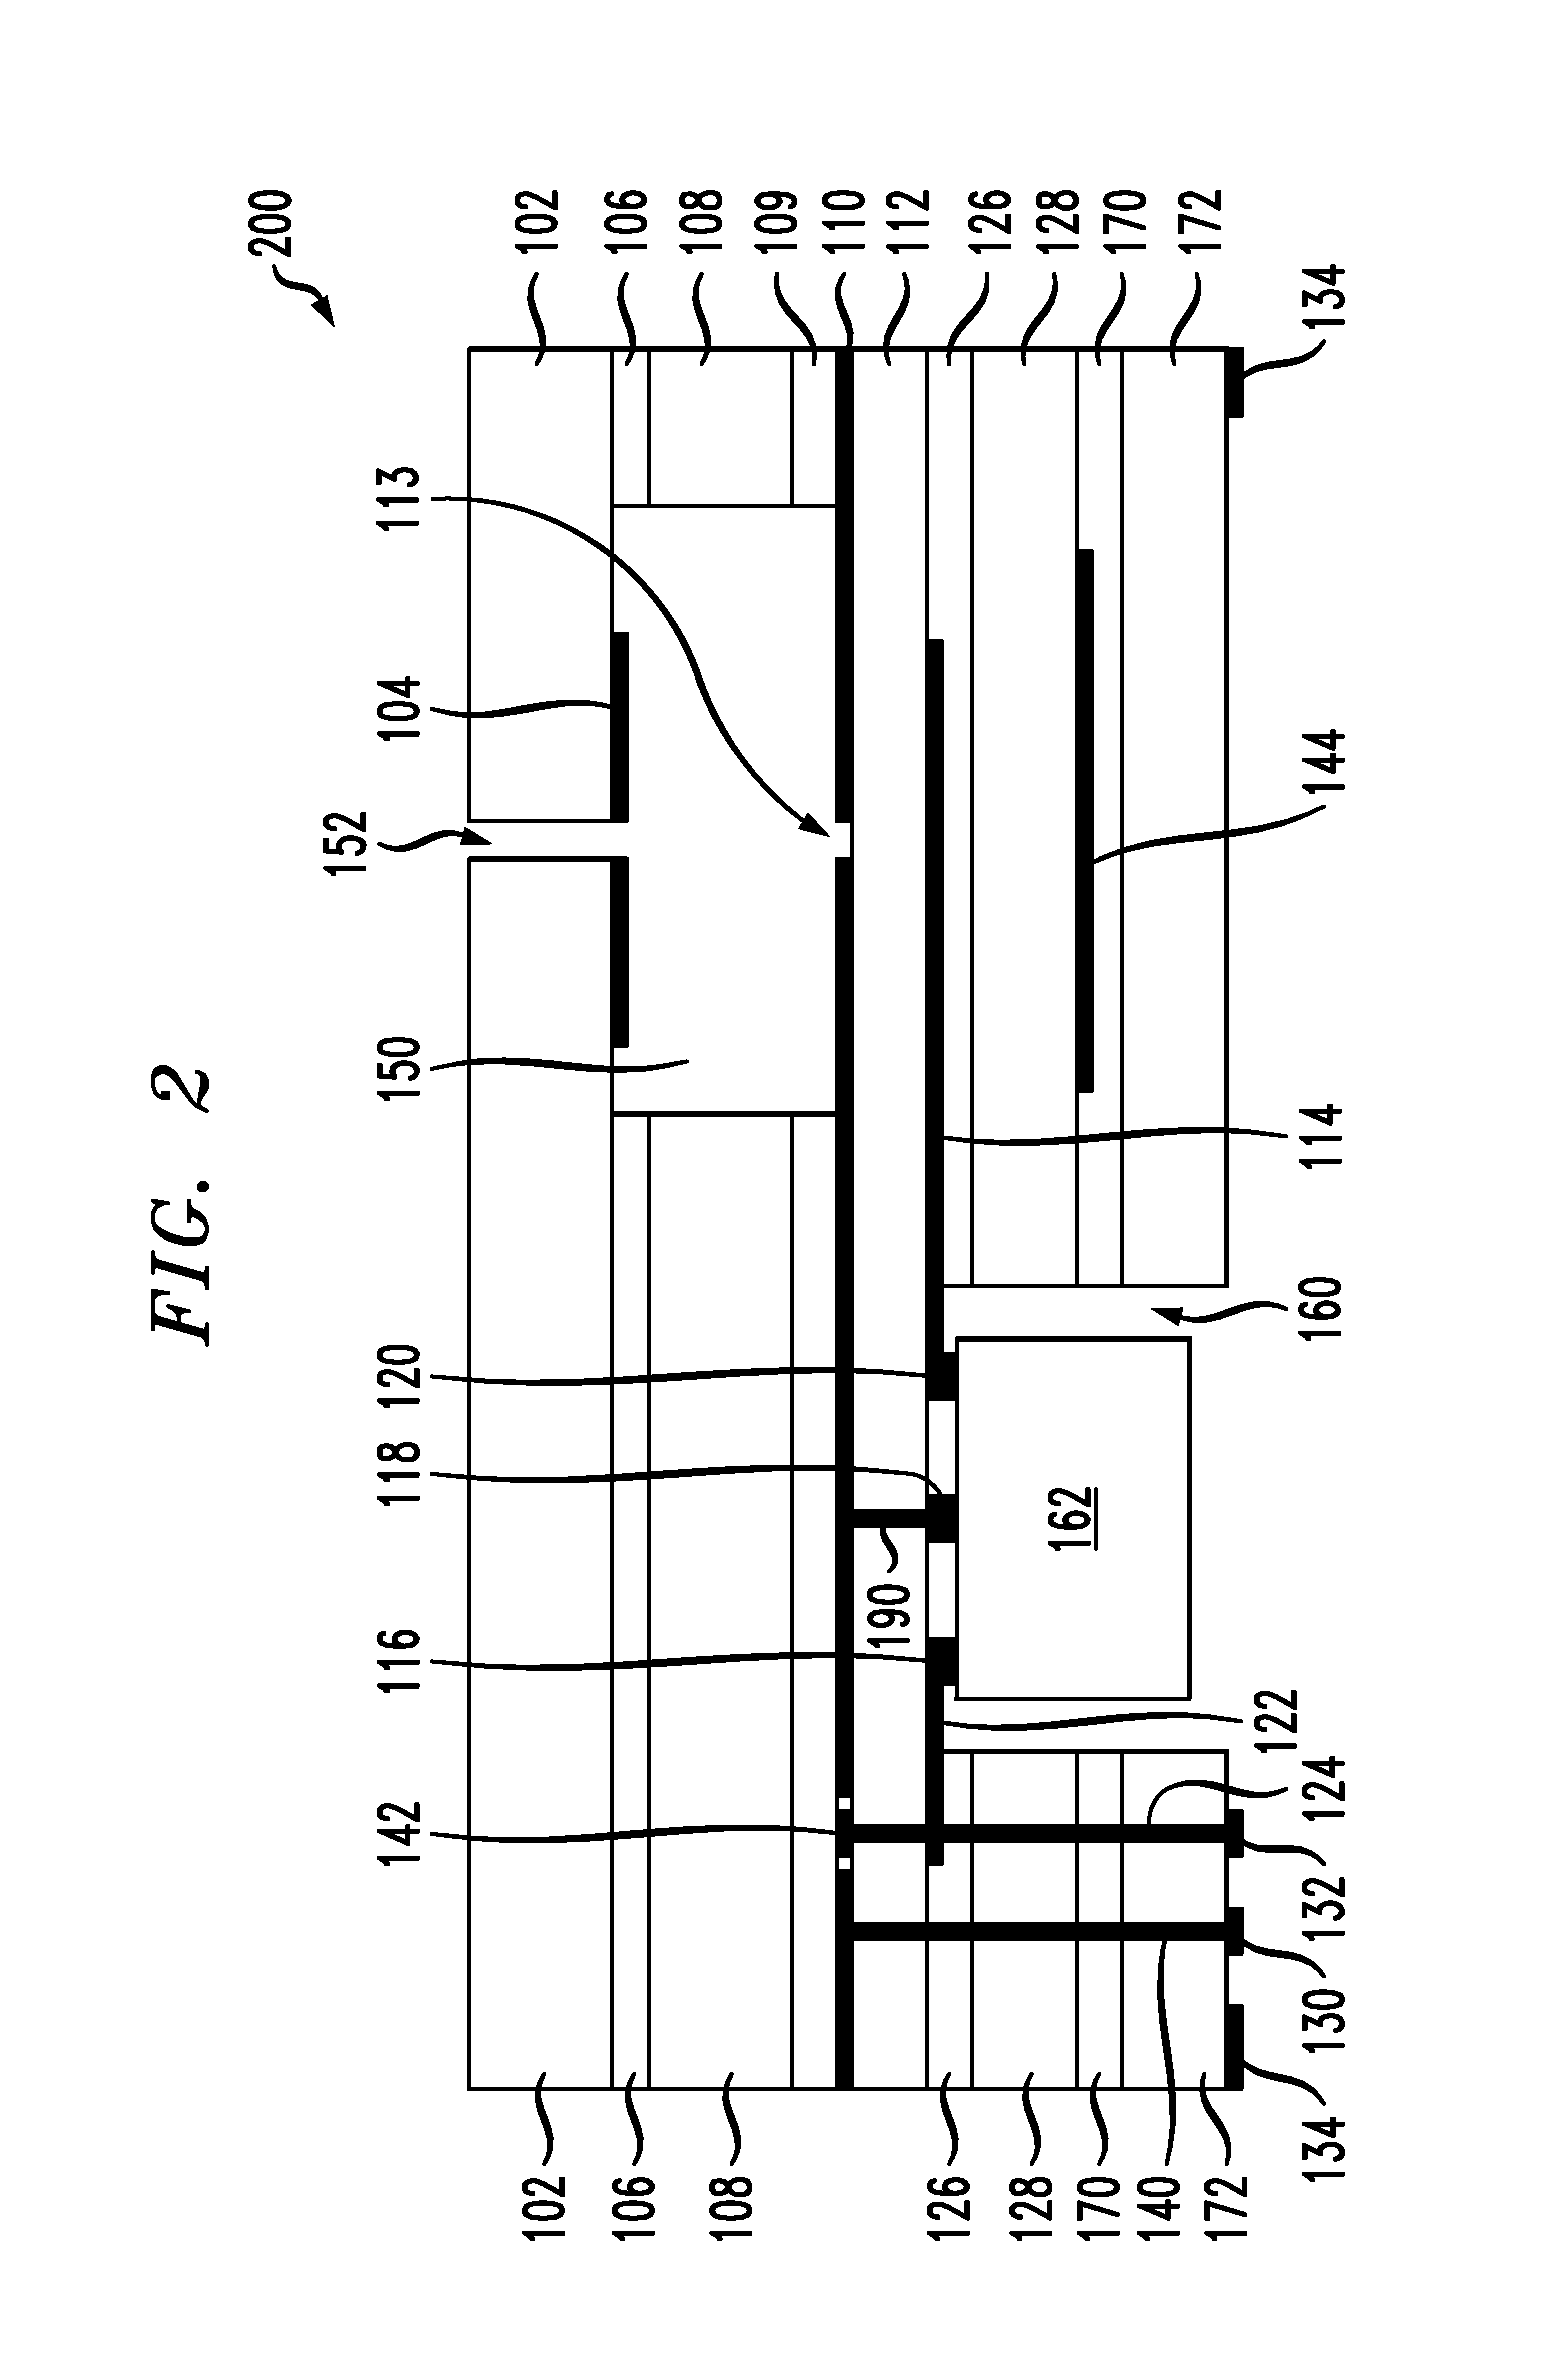 Simple radio frequency integrated circuit (RFIC) packages with integrated antennas